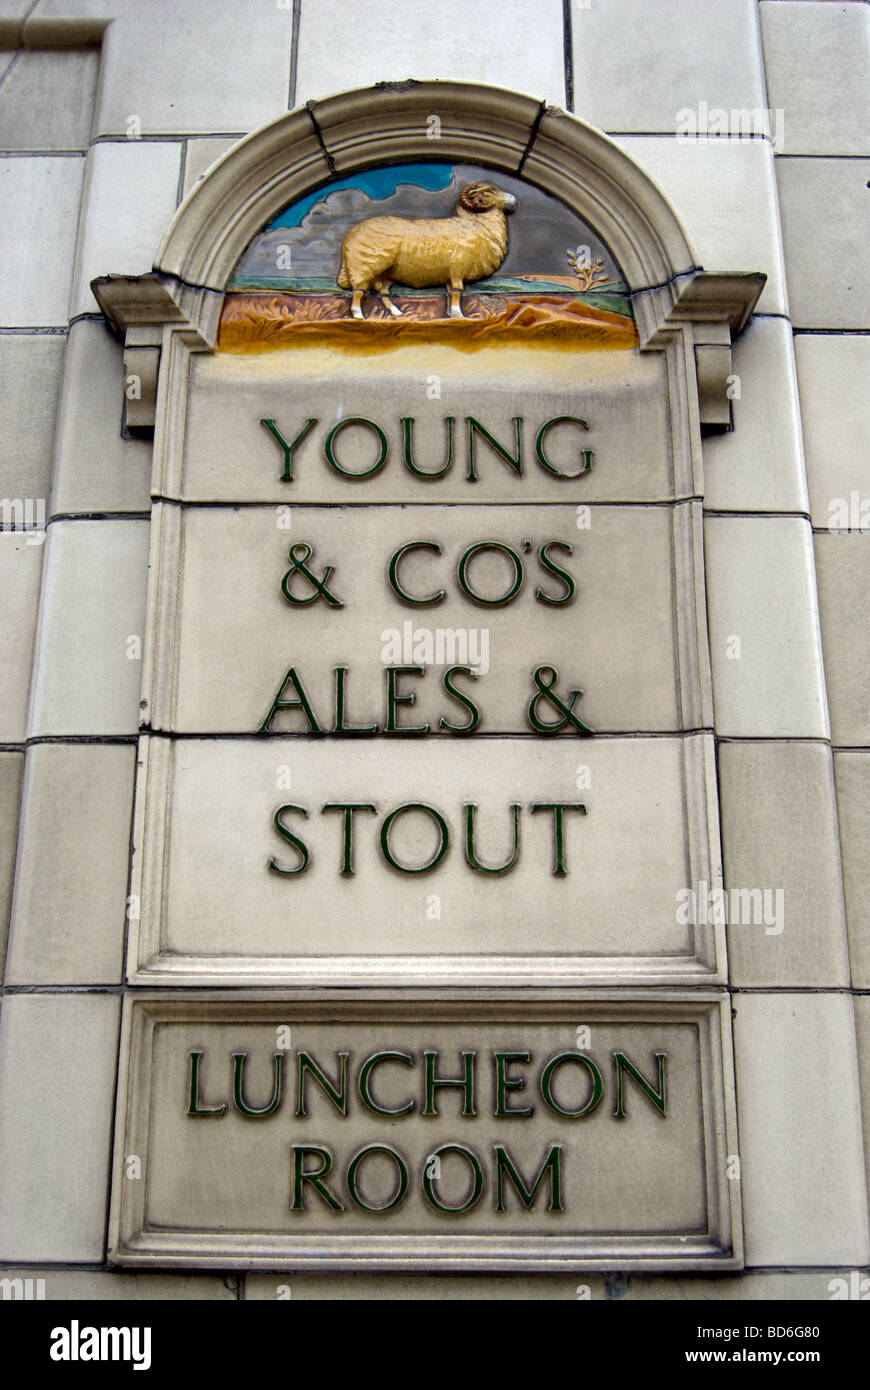 luncheon room and young & co's ales and stouts signs, and image of a ram, at the crown and anchor pub, chiswick, london, england Stock Photo